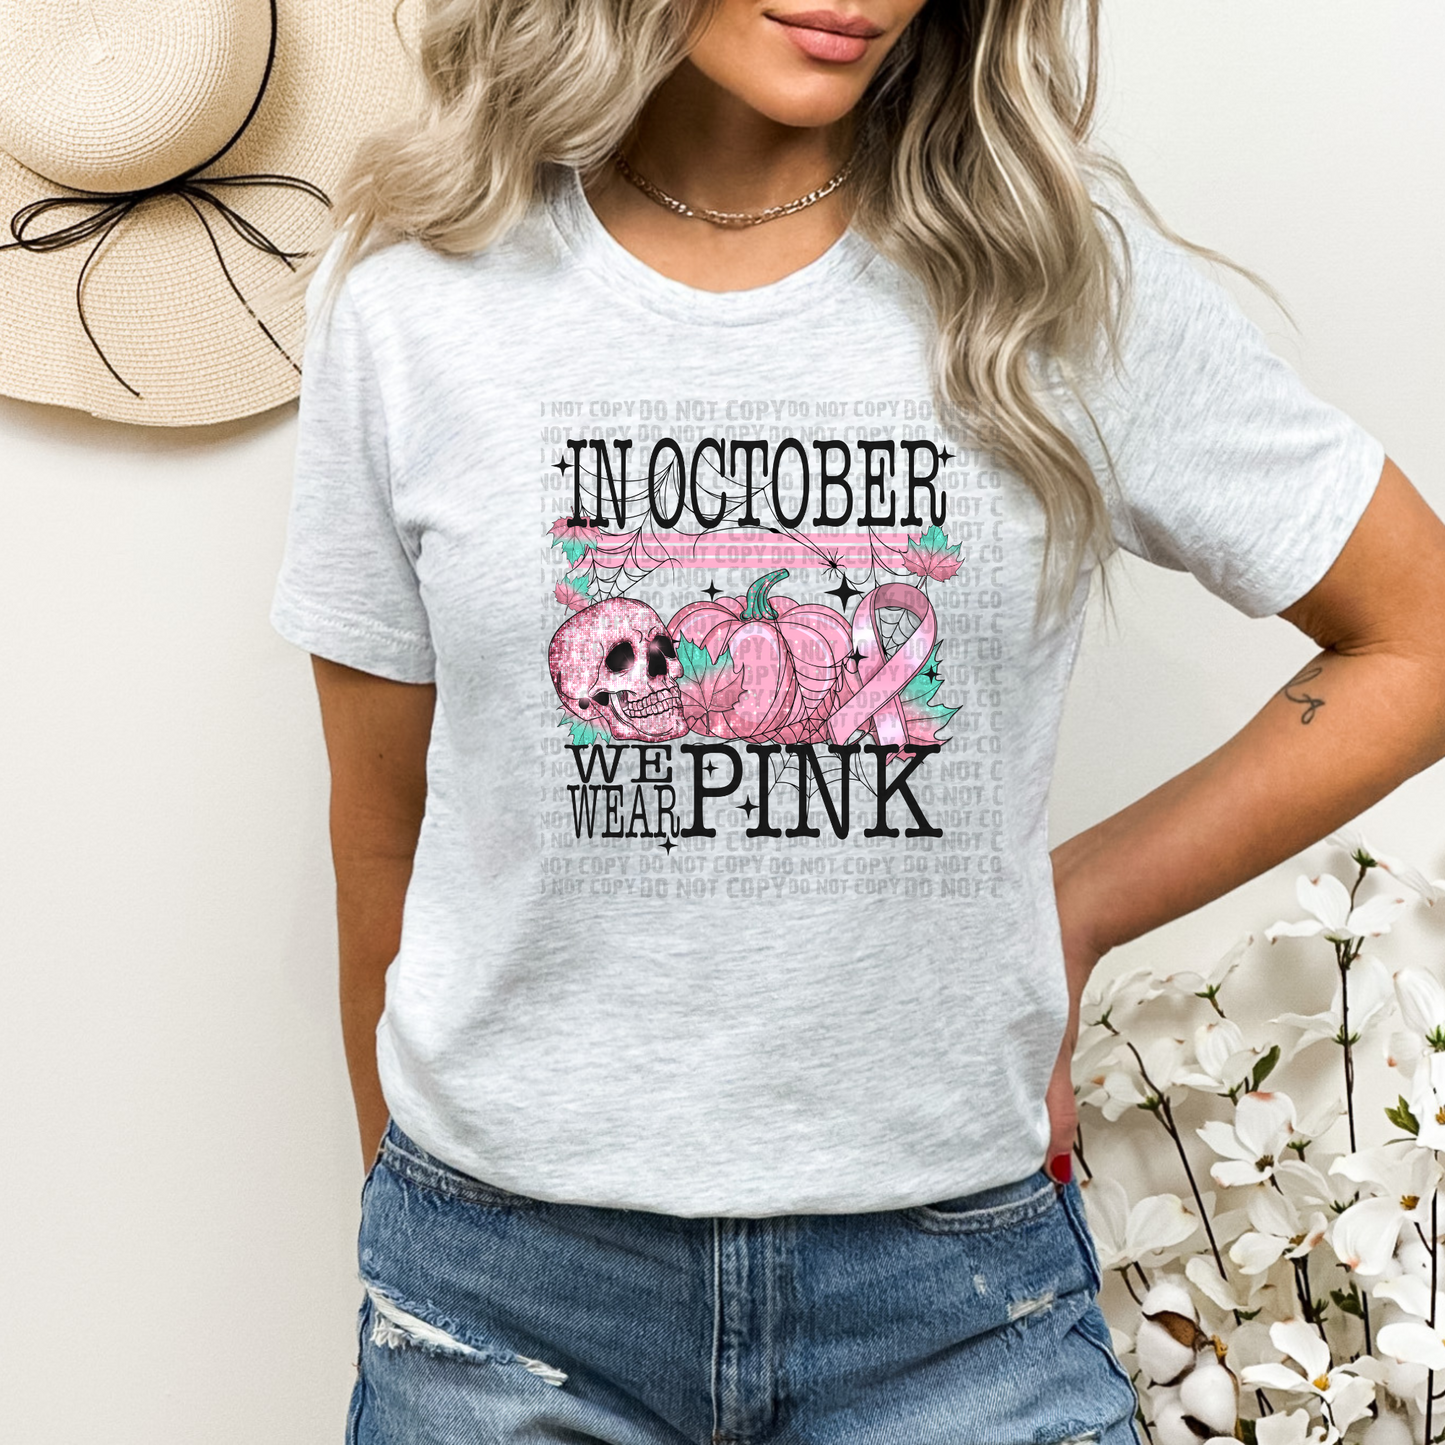 In October We Wear Pink T-Shirt | Breast Cancer Awareness Shirt | Fast Shipping | Super Soft Shirts for Women/Kid's